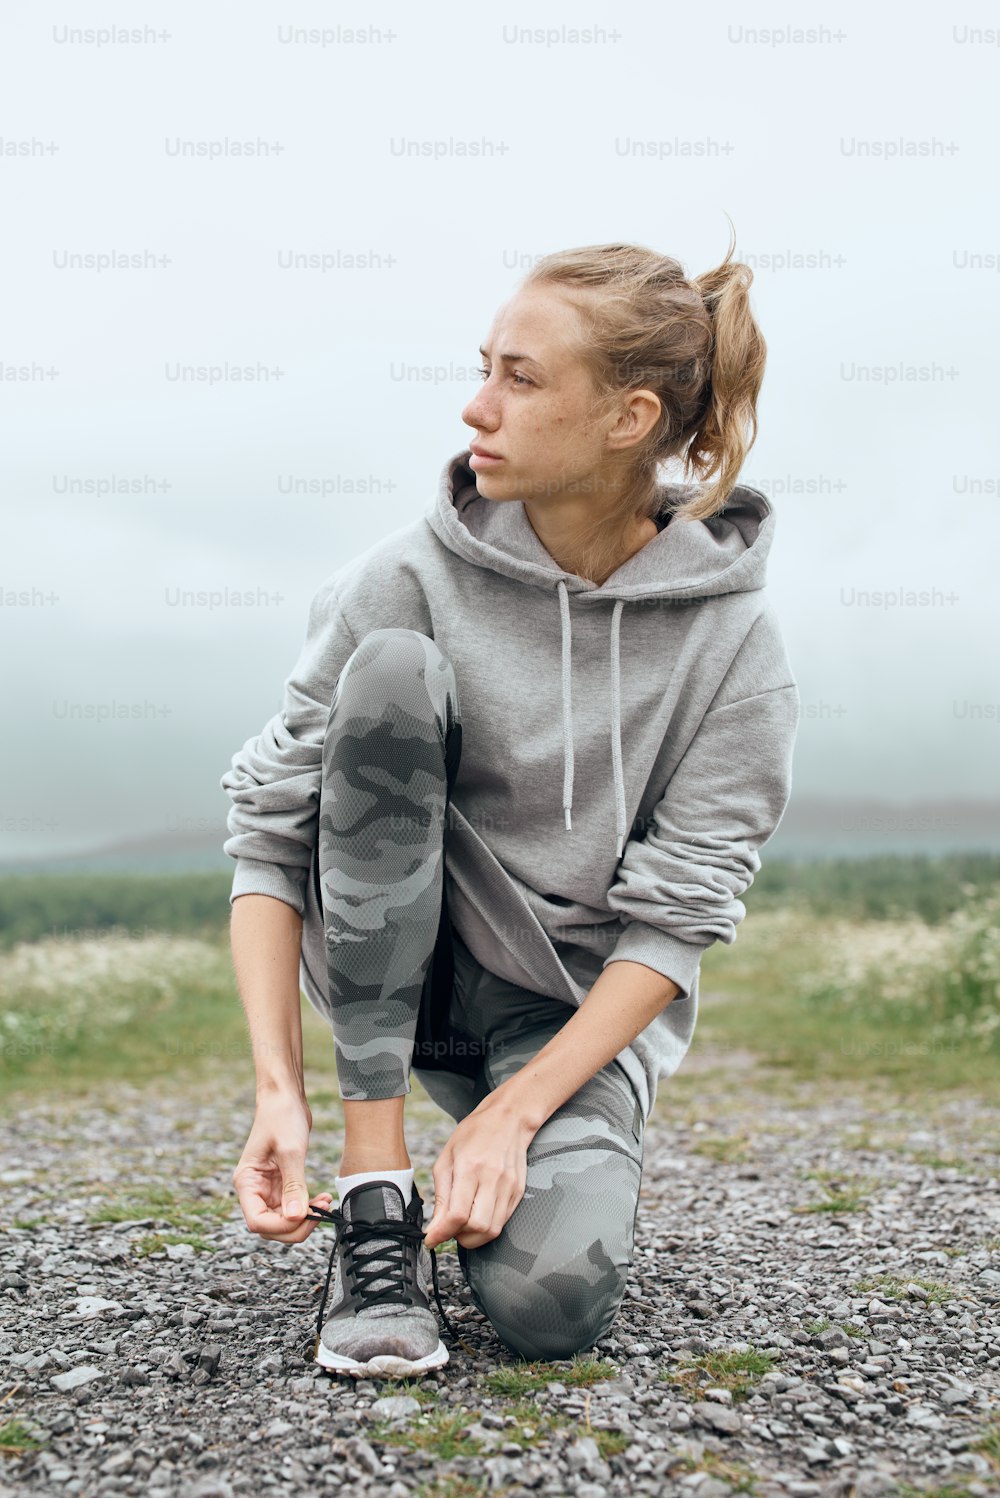 Mid age woman tying shoelaces , getting ready for work out outdoor, she is at the country road with scenic view, looking away